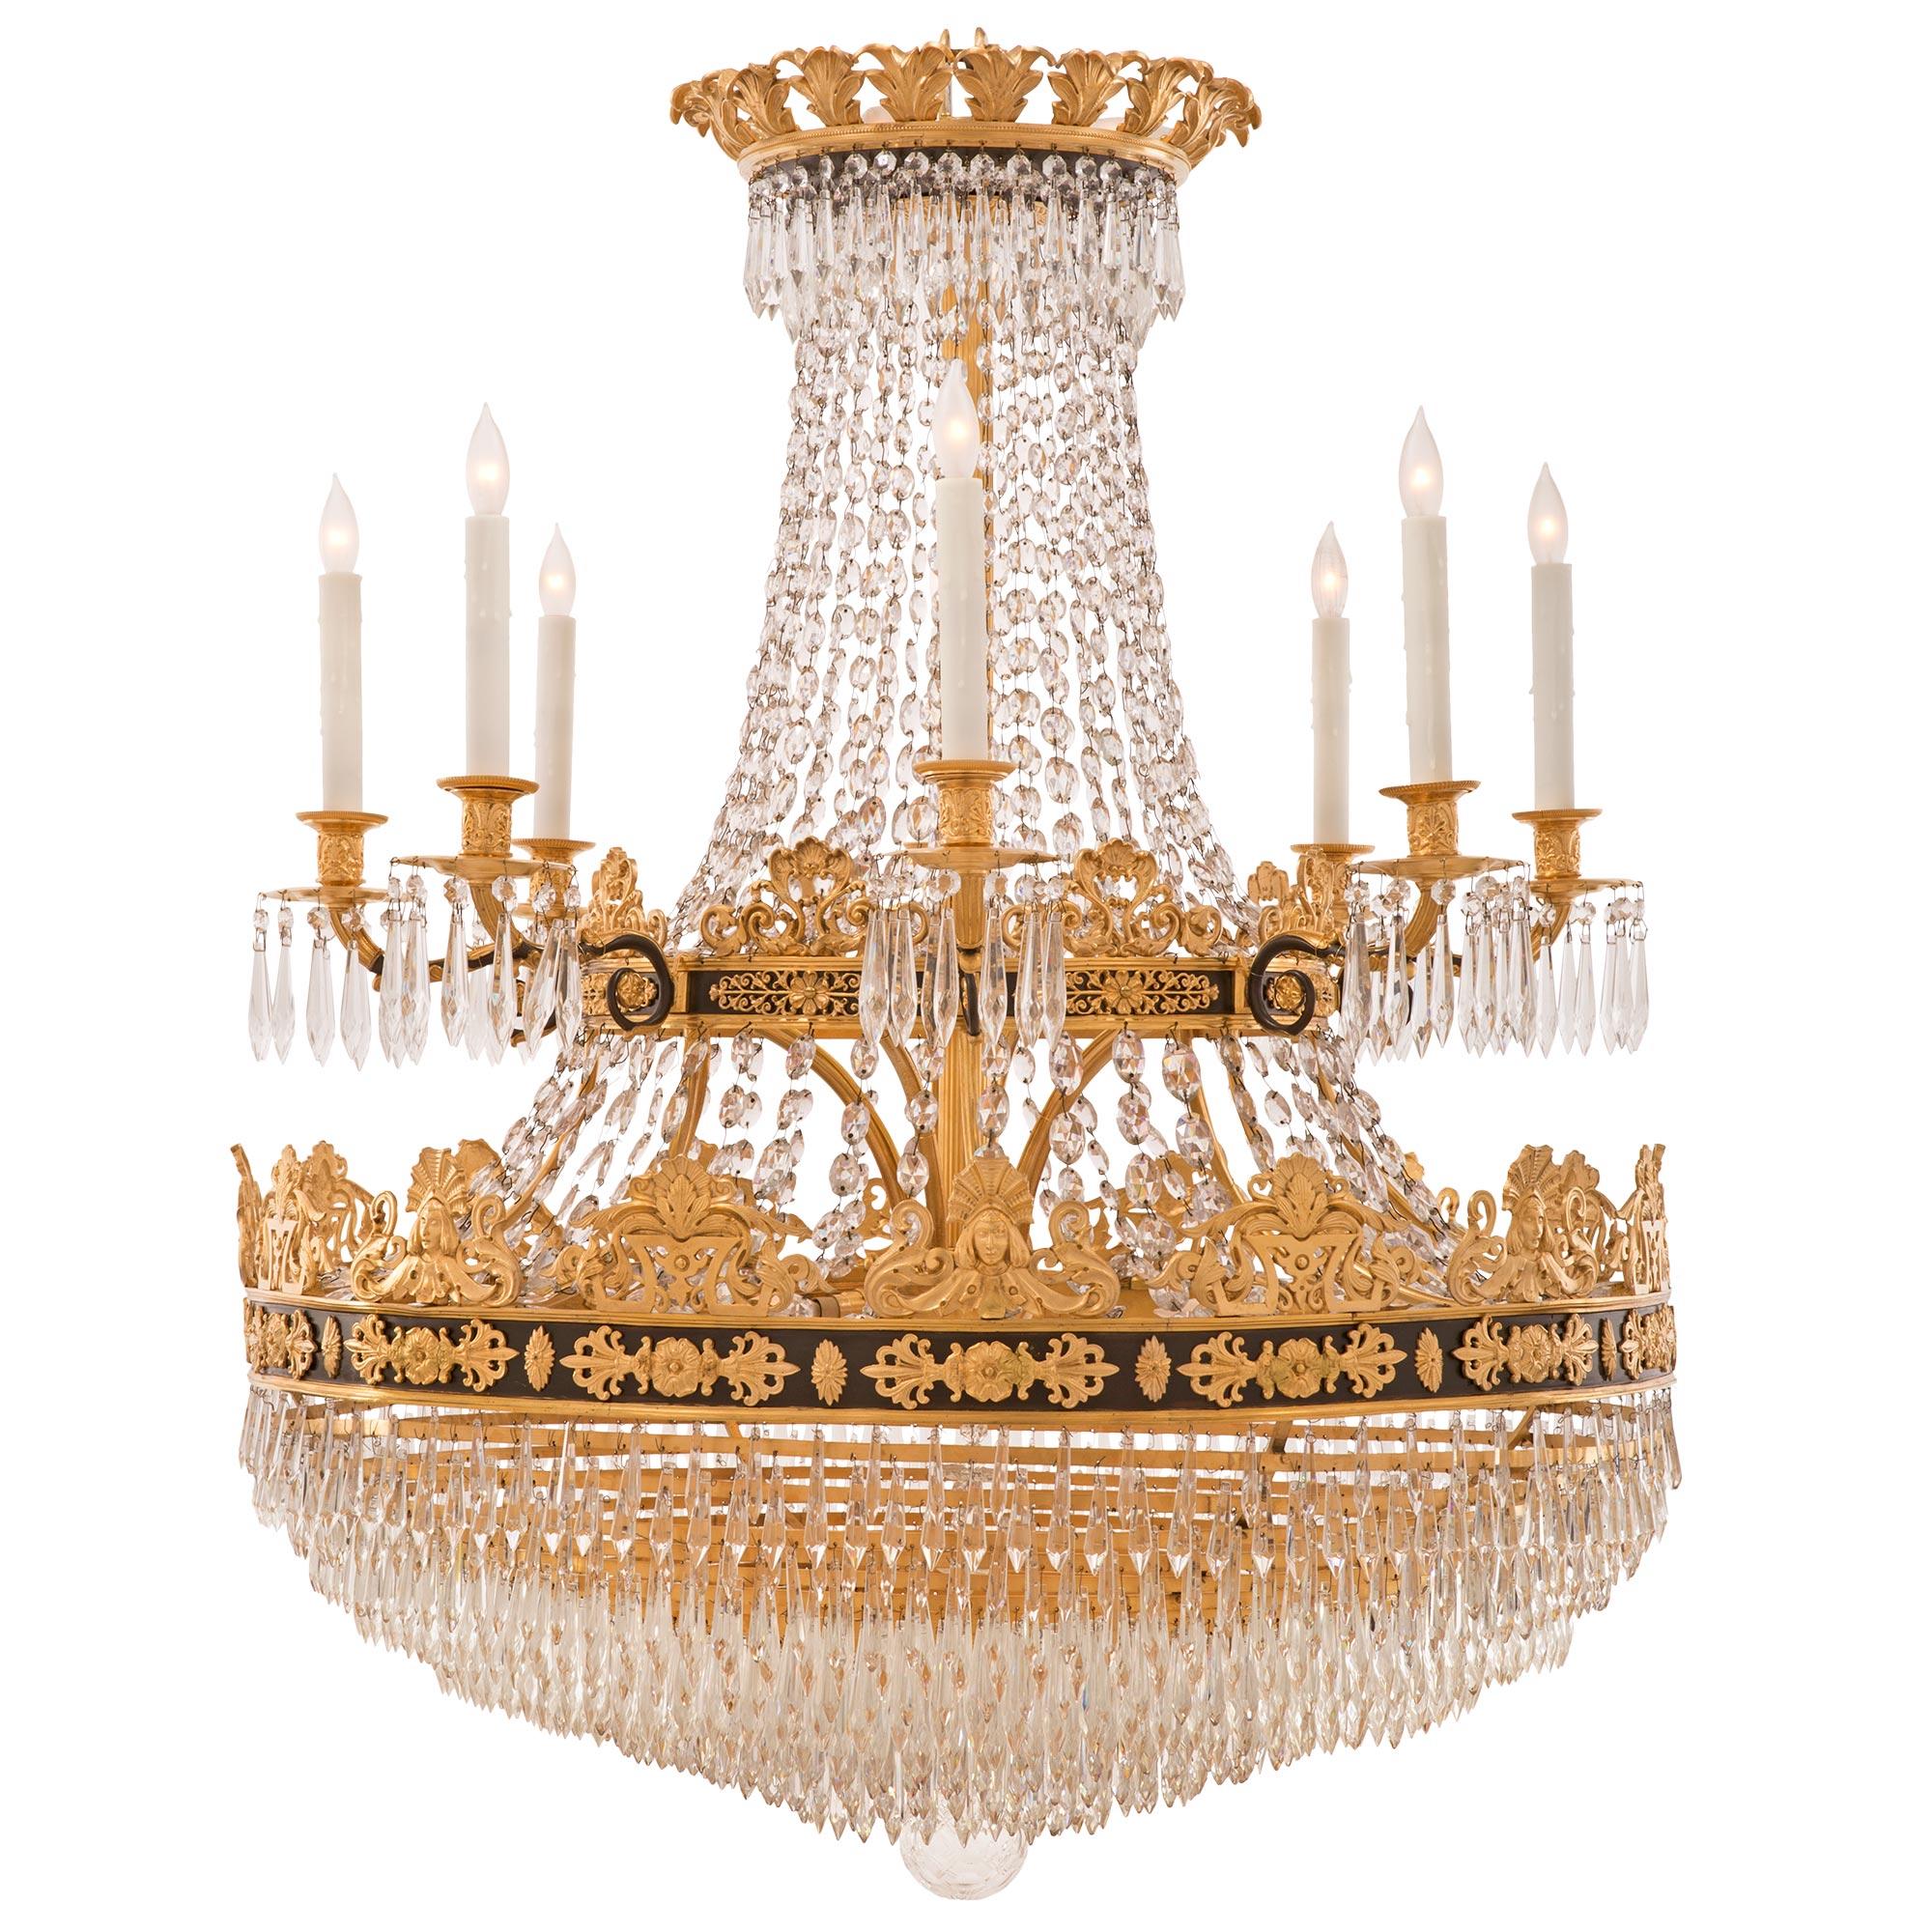 A stunning and extremely high quality Baltic 19th century Empire st. ormolu, patinated bronze and crystal chandelier. The two tiered eight arm twenty four light chandelier is centered by a beautiful bottom crystal ball with a lovely and uniquely cut